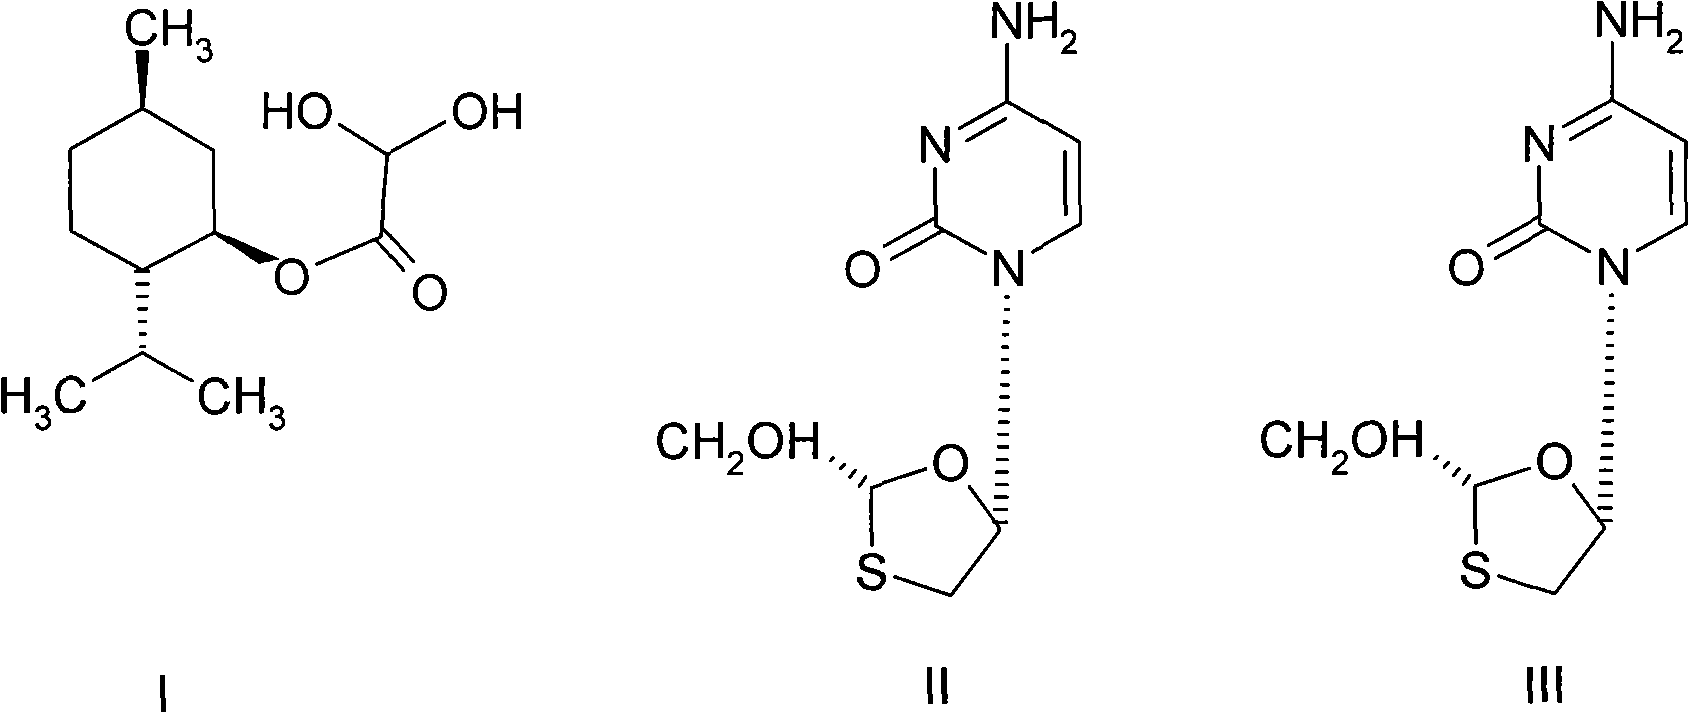 Method for preparing L-menthol glyoxylic ester monohydrate with solid acid as catalyst